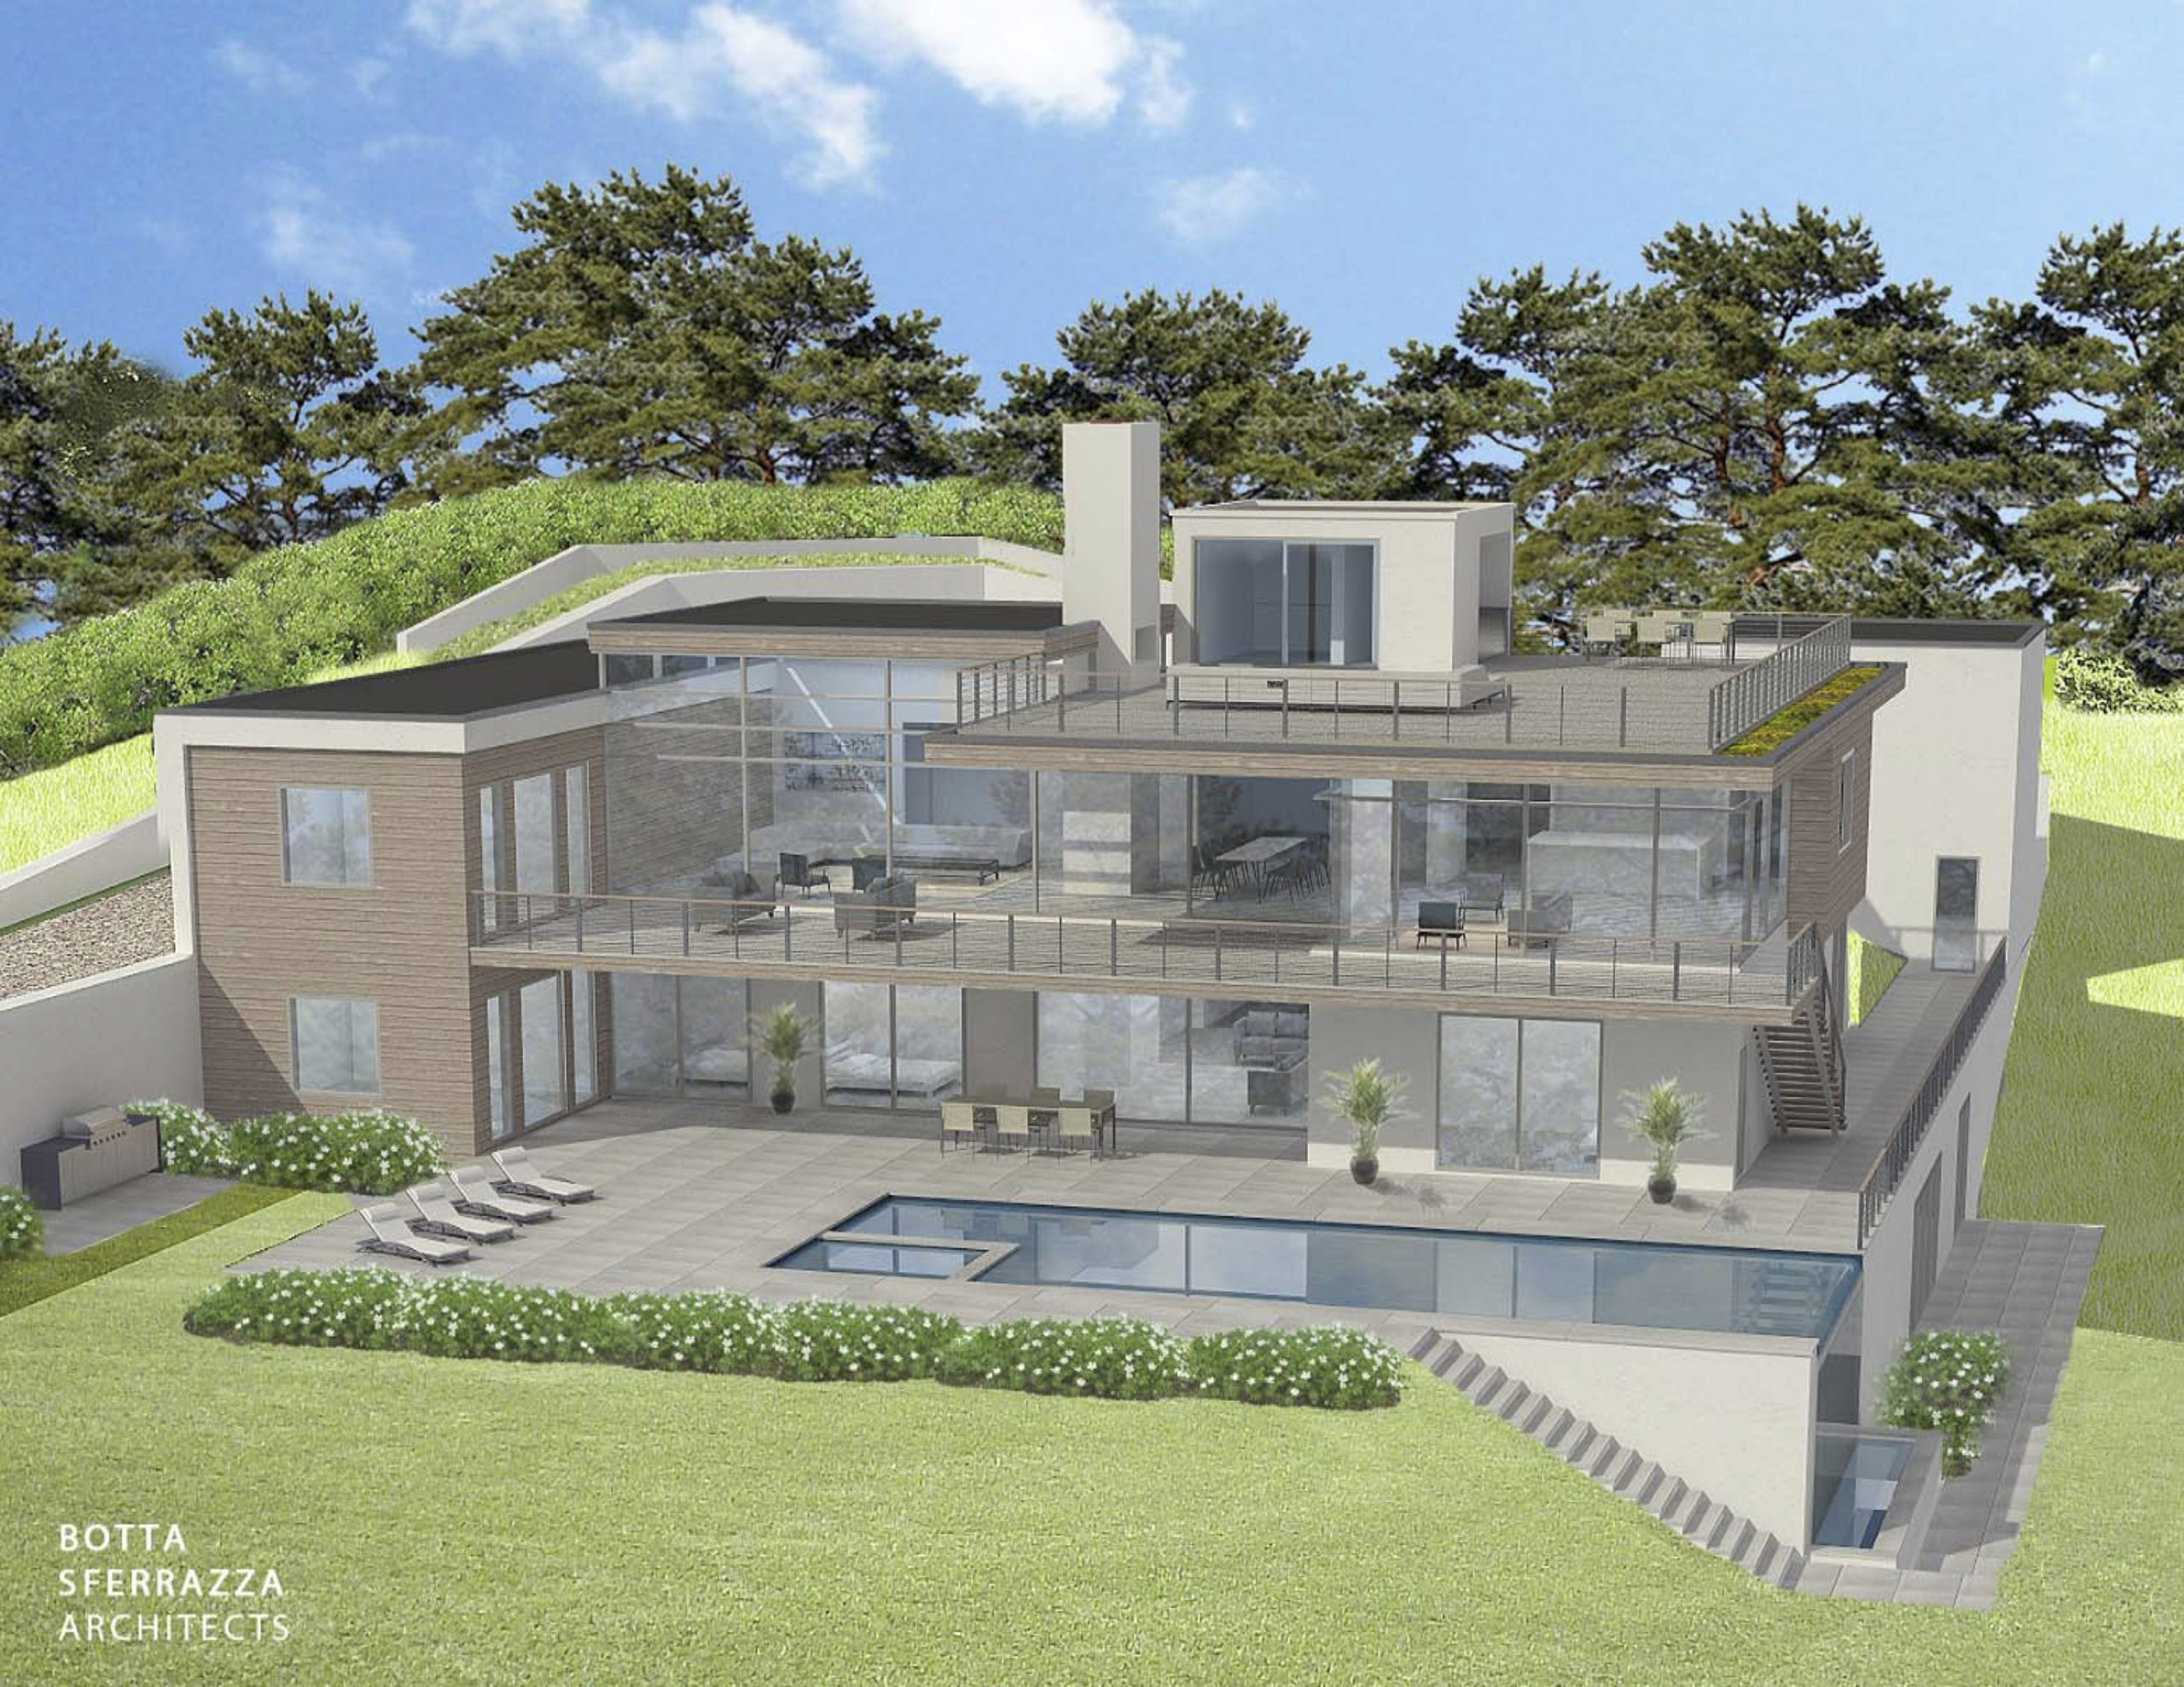 An architect's rendering of 96 Day Lily Lane